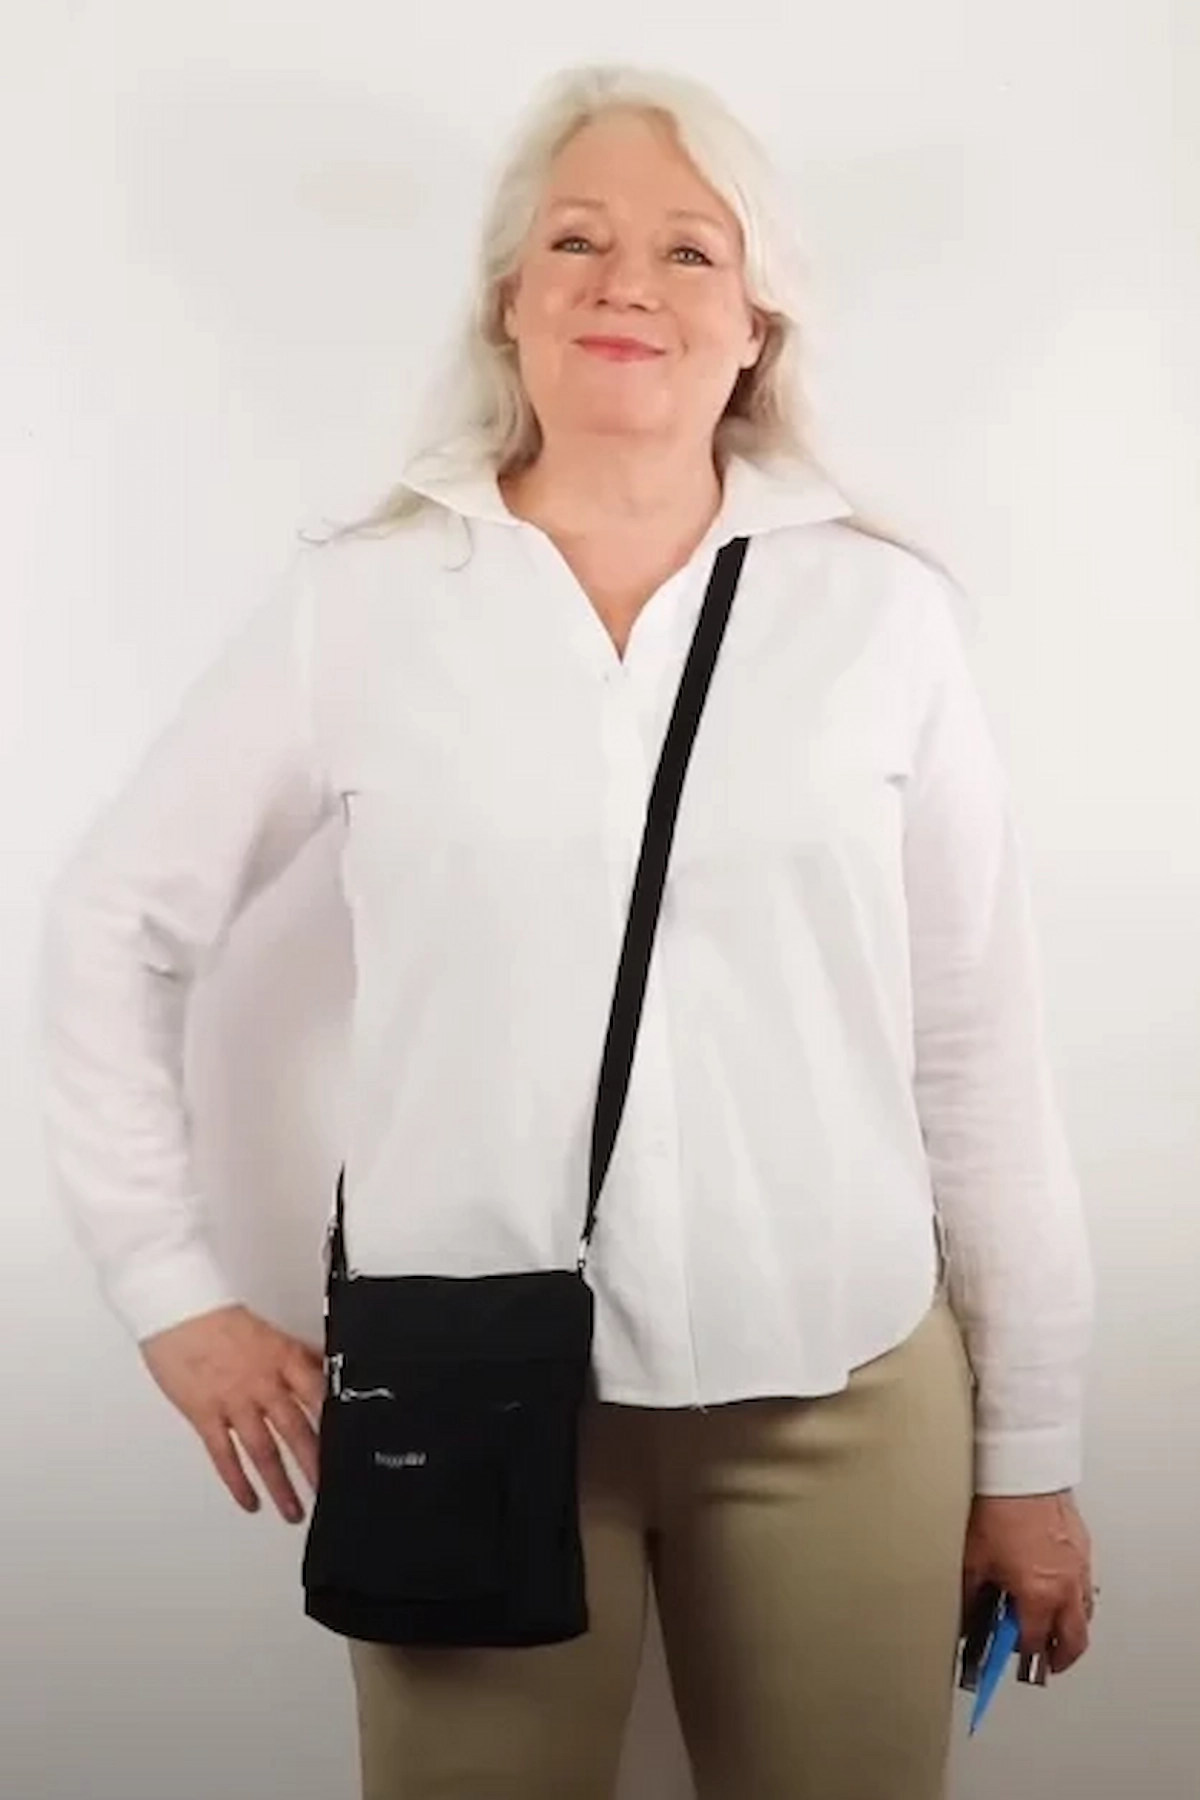 small-crossover-purse-youtube-awesome-over-50